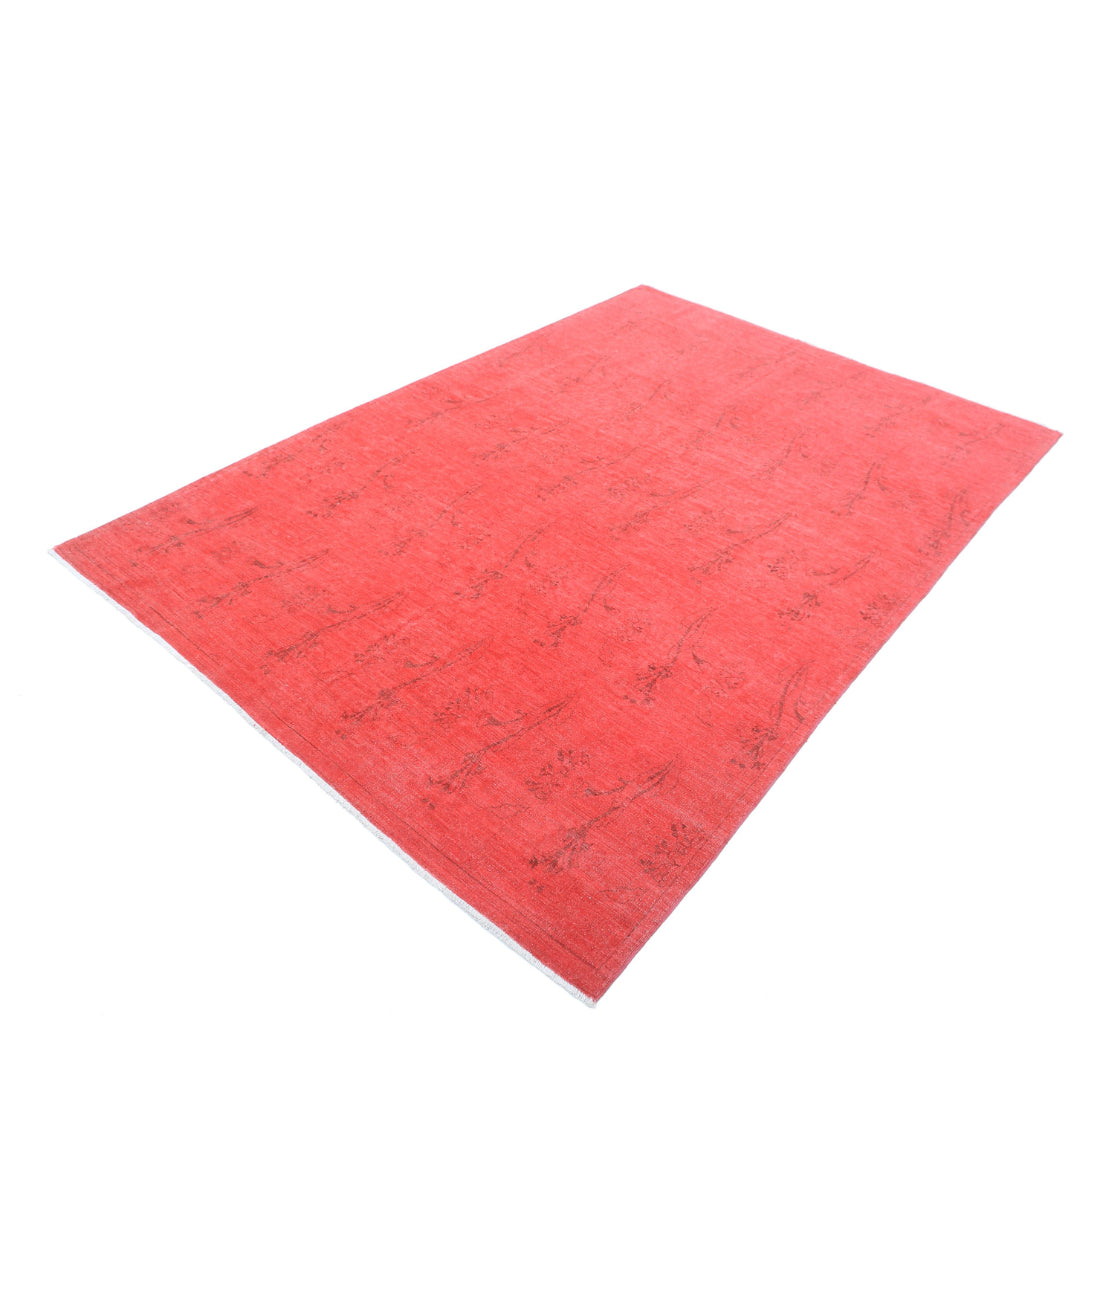 Hand Knotted Overdye Wool Rug - 5'11'' x 8'8'' 5'11'' x 8'8'' (178 X 260) / Red / Red